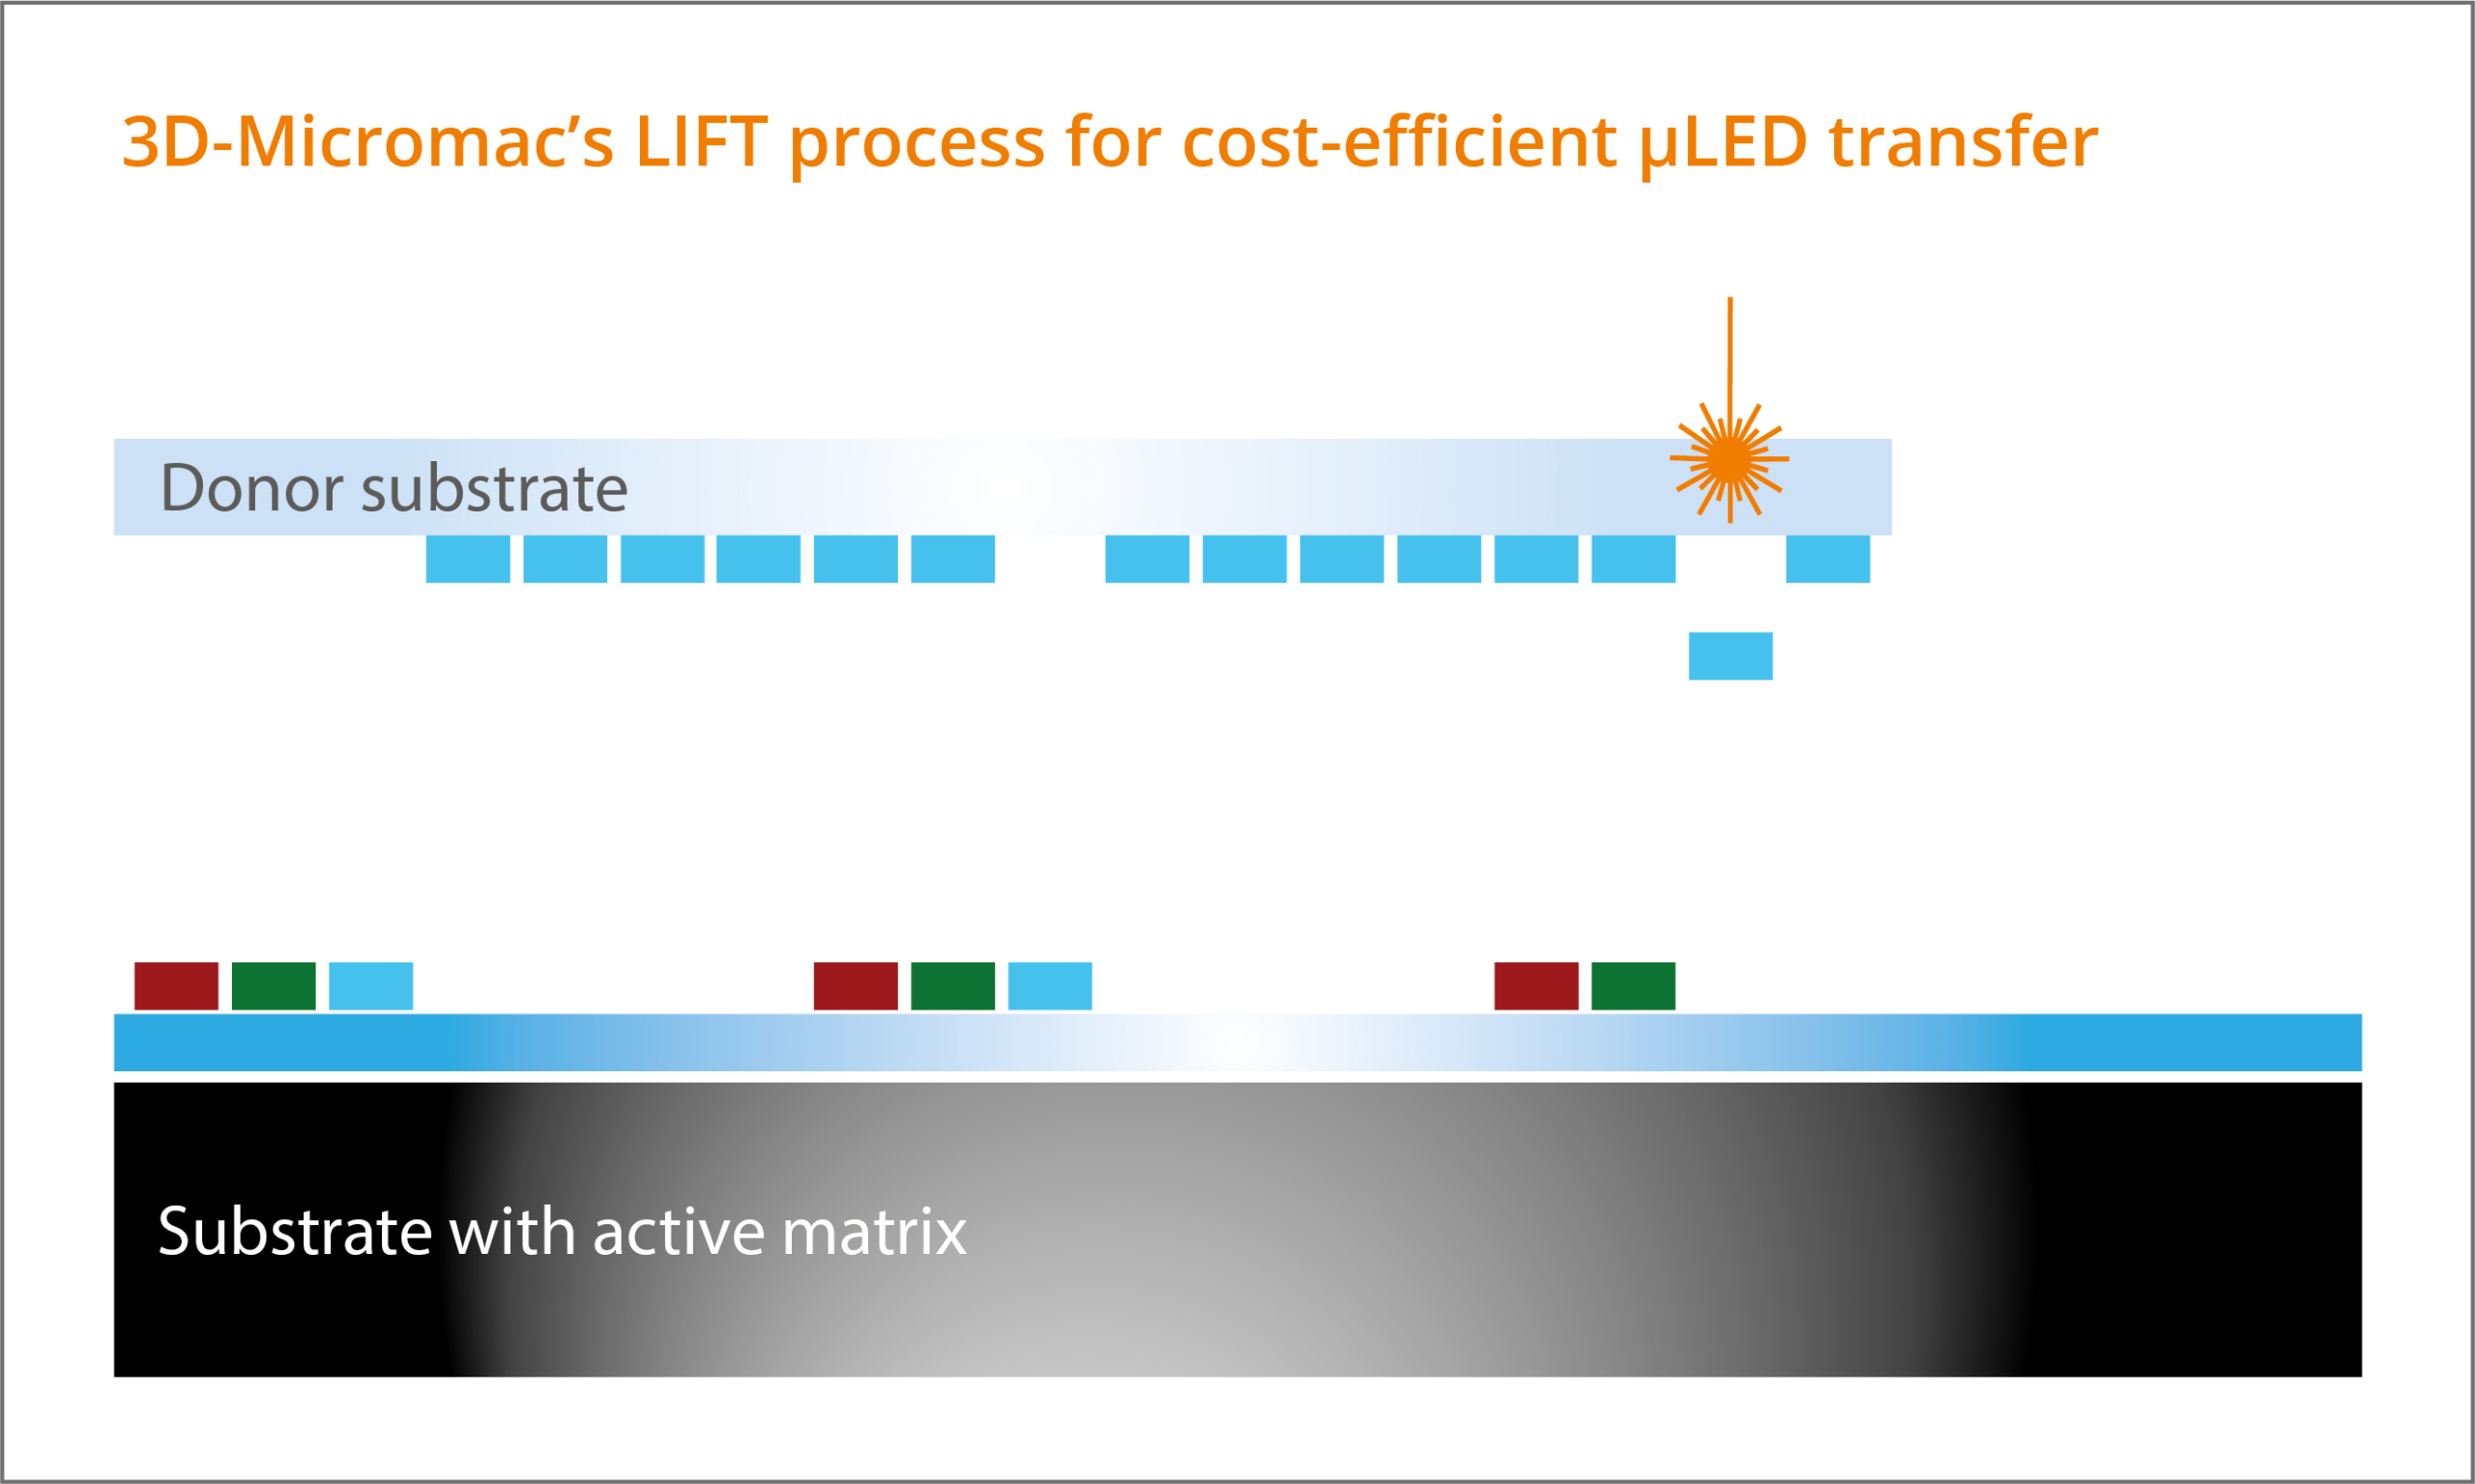 3D-Micromac’s Laser-Induced Forward Transfer (LIFT) process provides high-throughput and cost-efficient transfer of microLED chips from the carrier substrate to the display substrate.